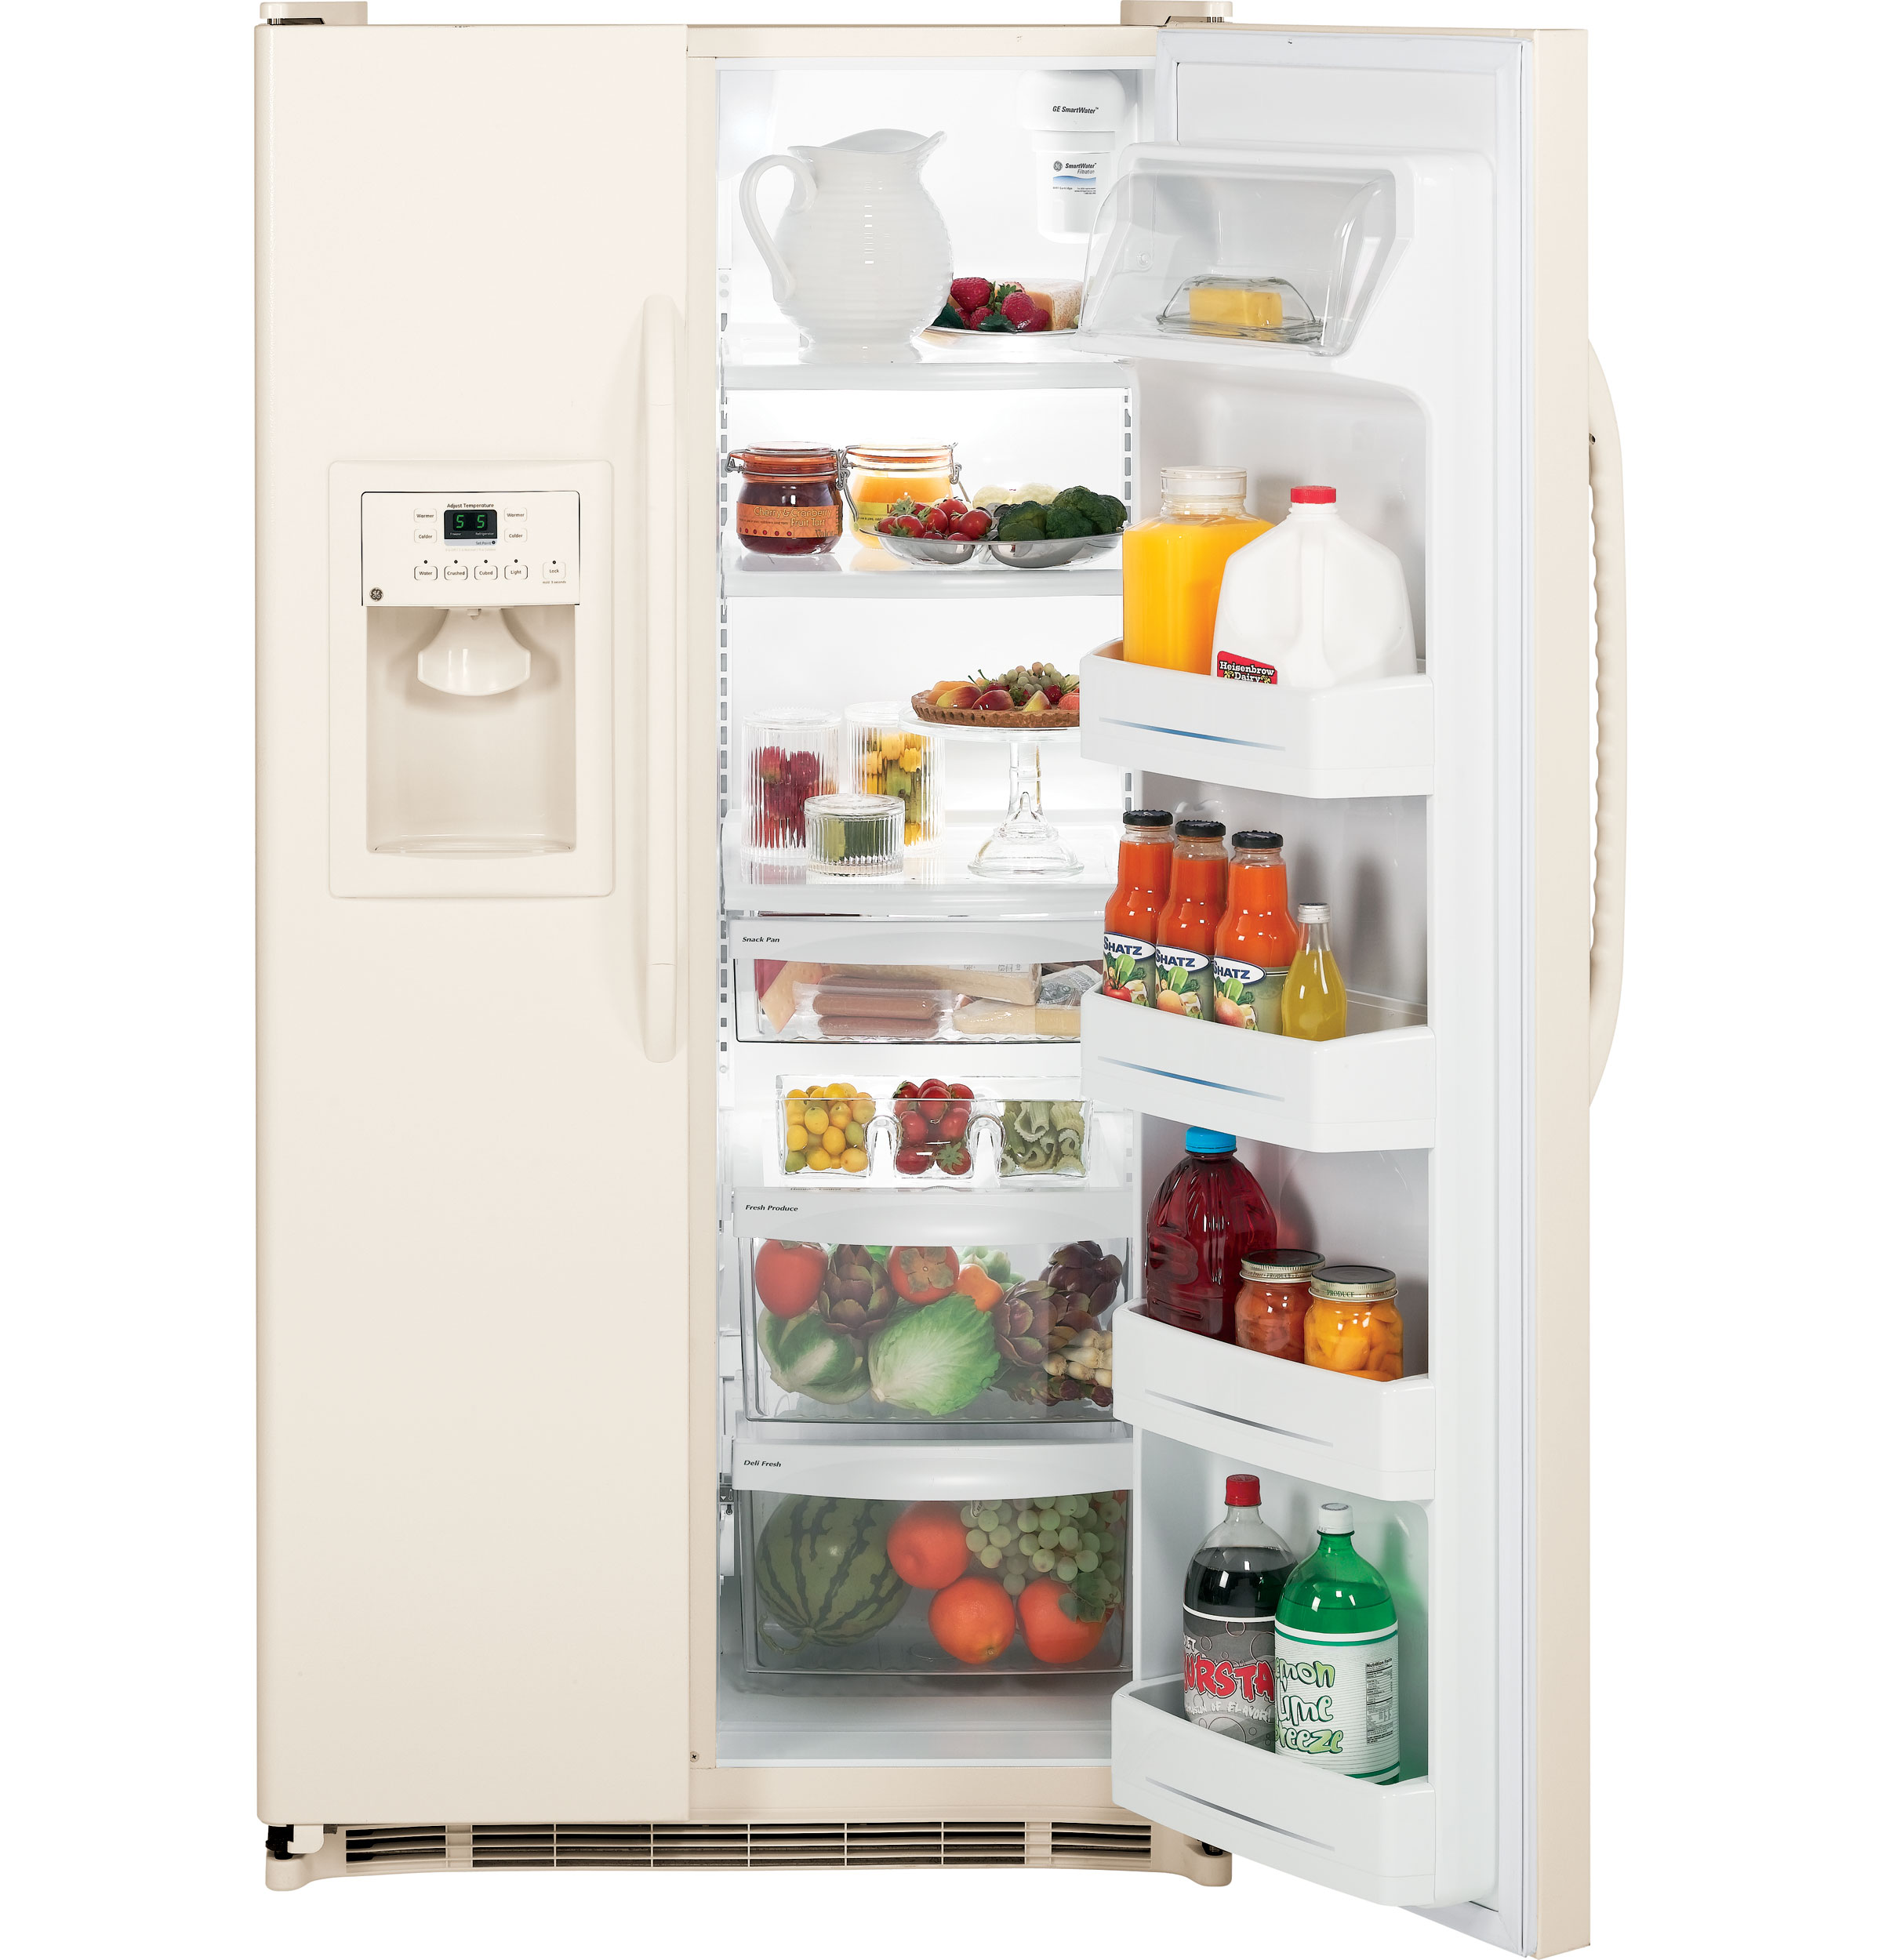 GE® ENERGY STAR® 22.1 Cu. Ft. Side-By-Side Refrigerator with Dispenser